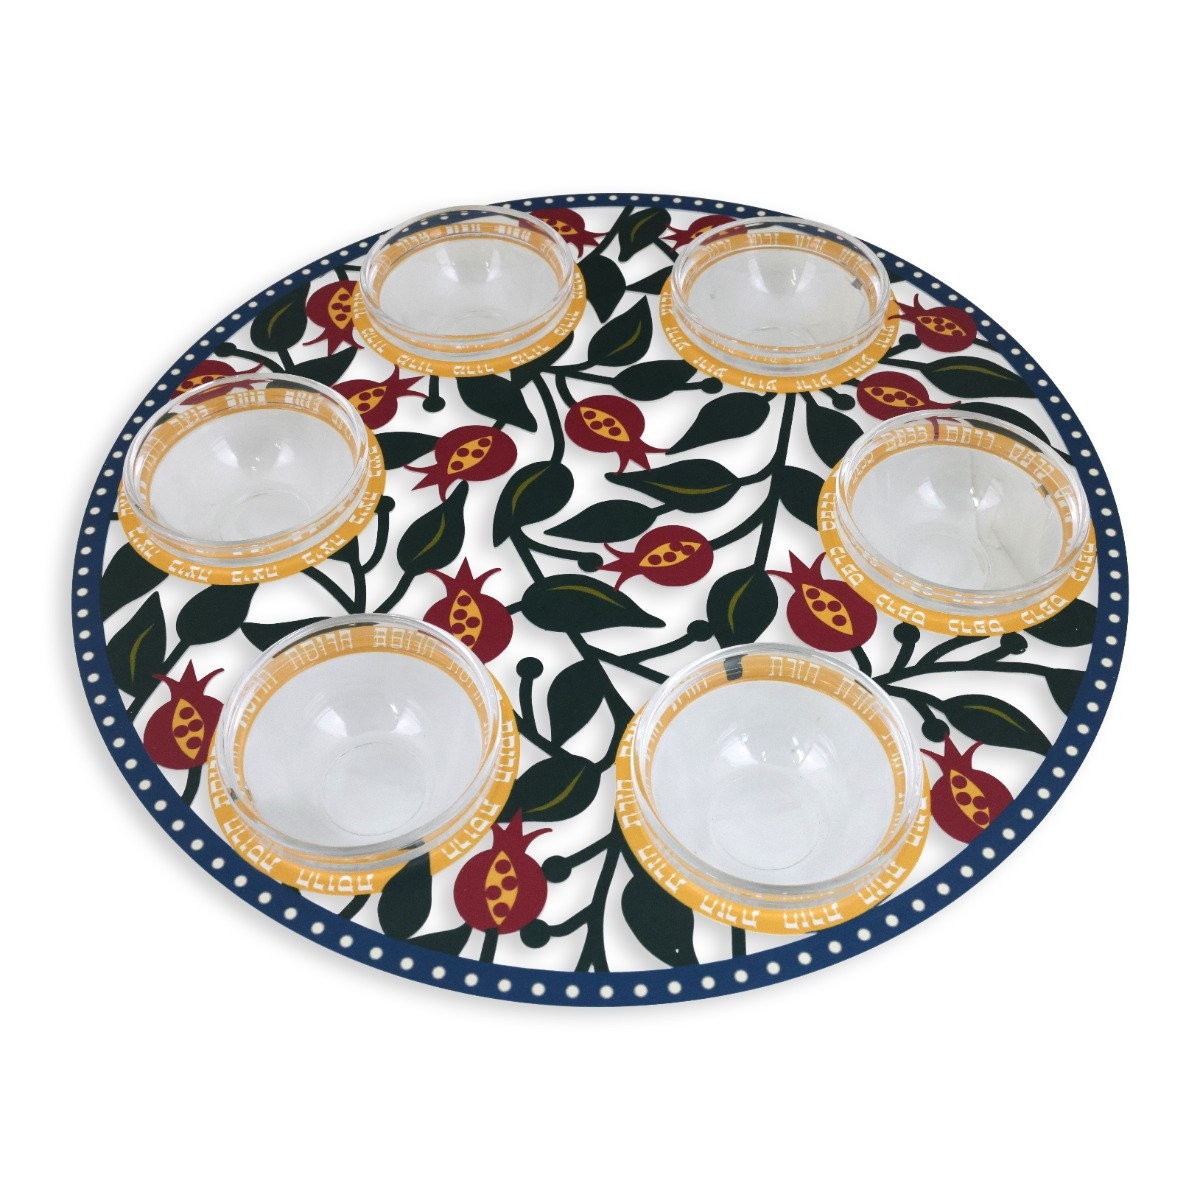 Seder Plate With Pomegranate Design By Dorit Judaica - 1